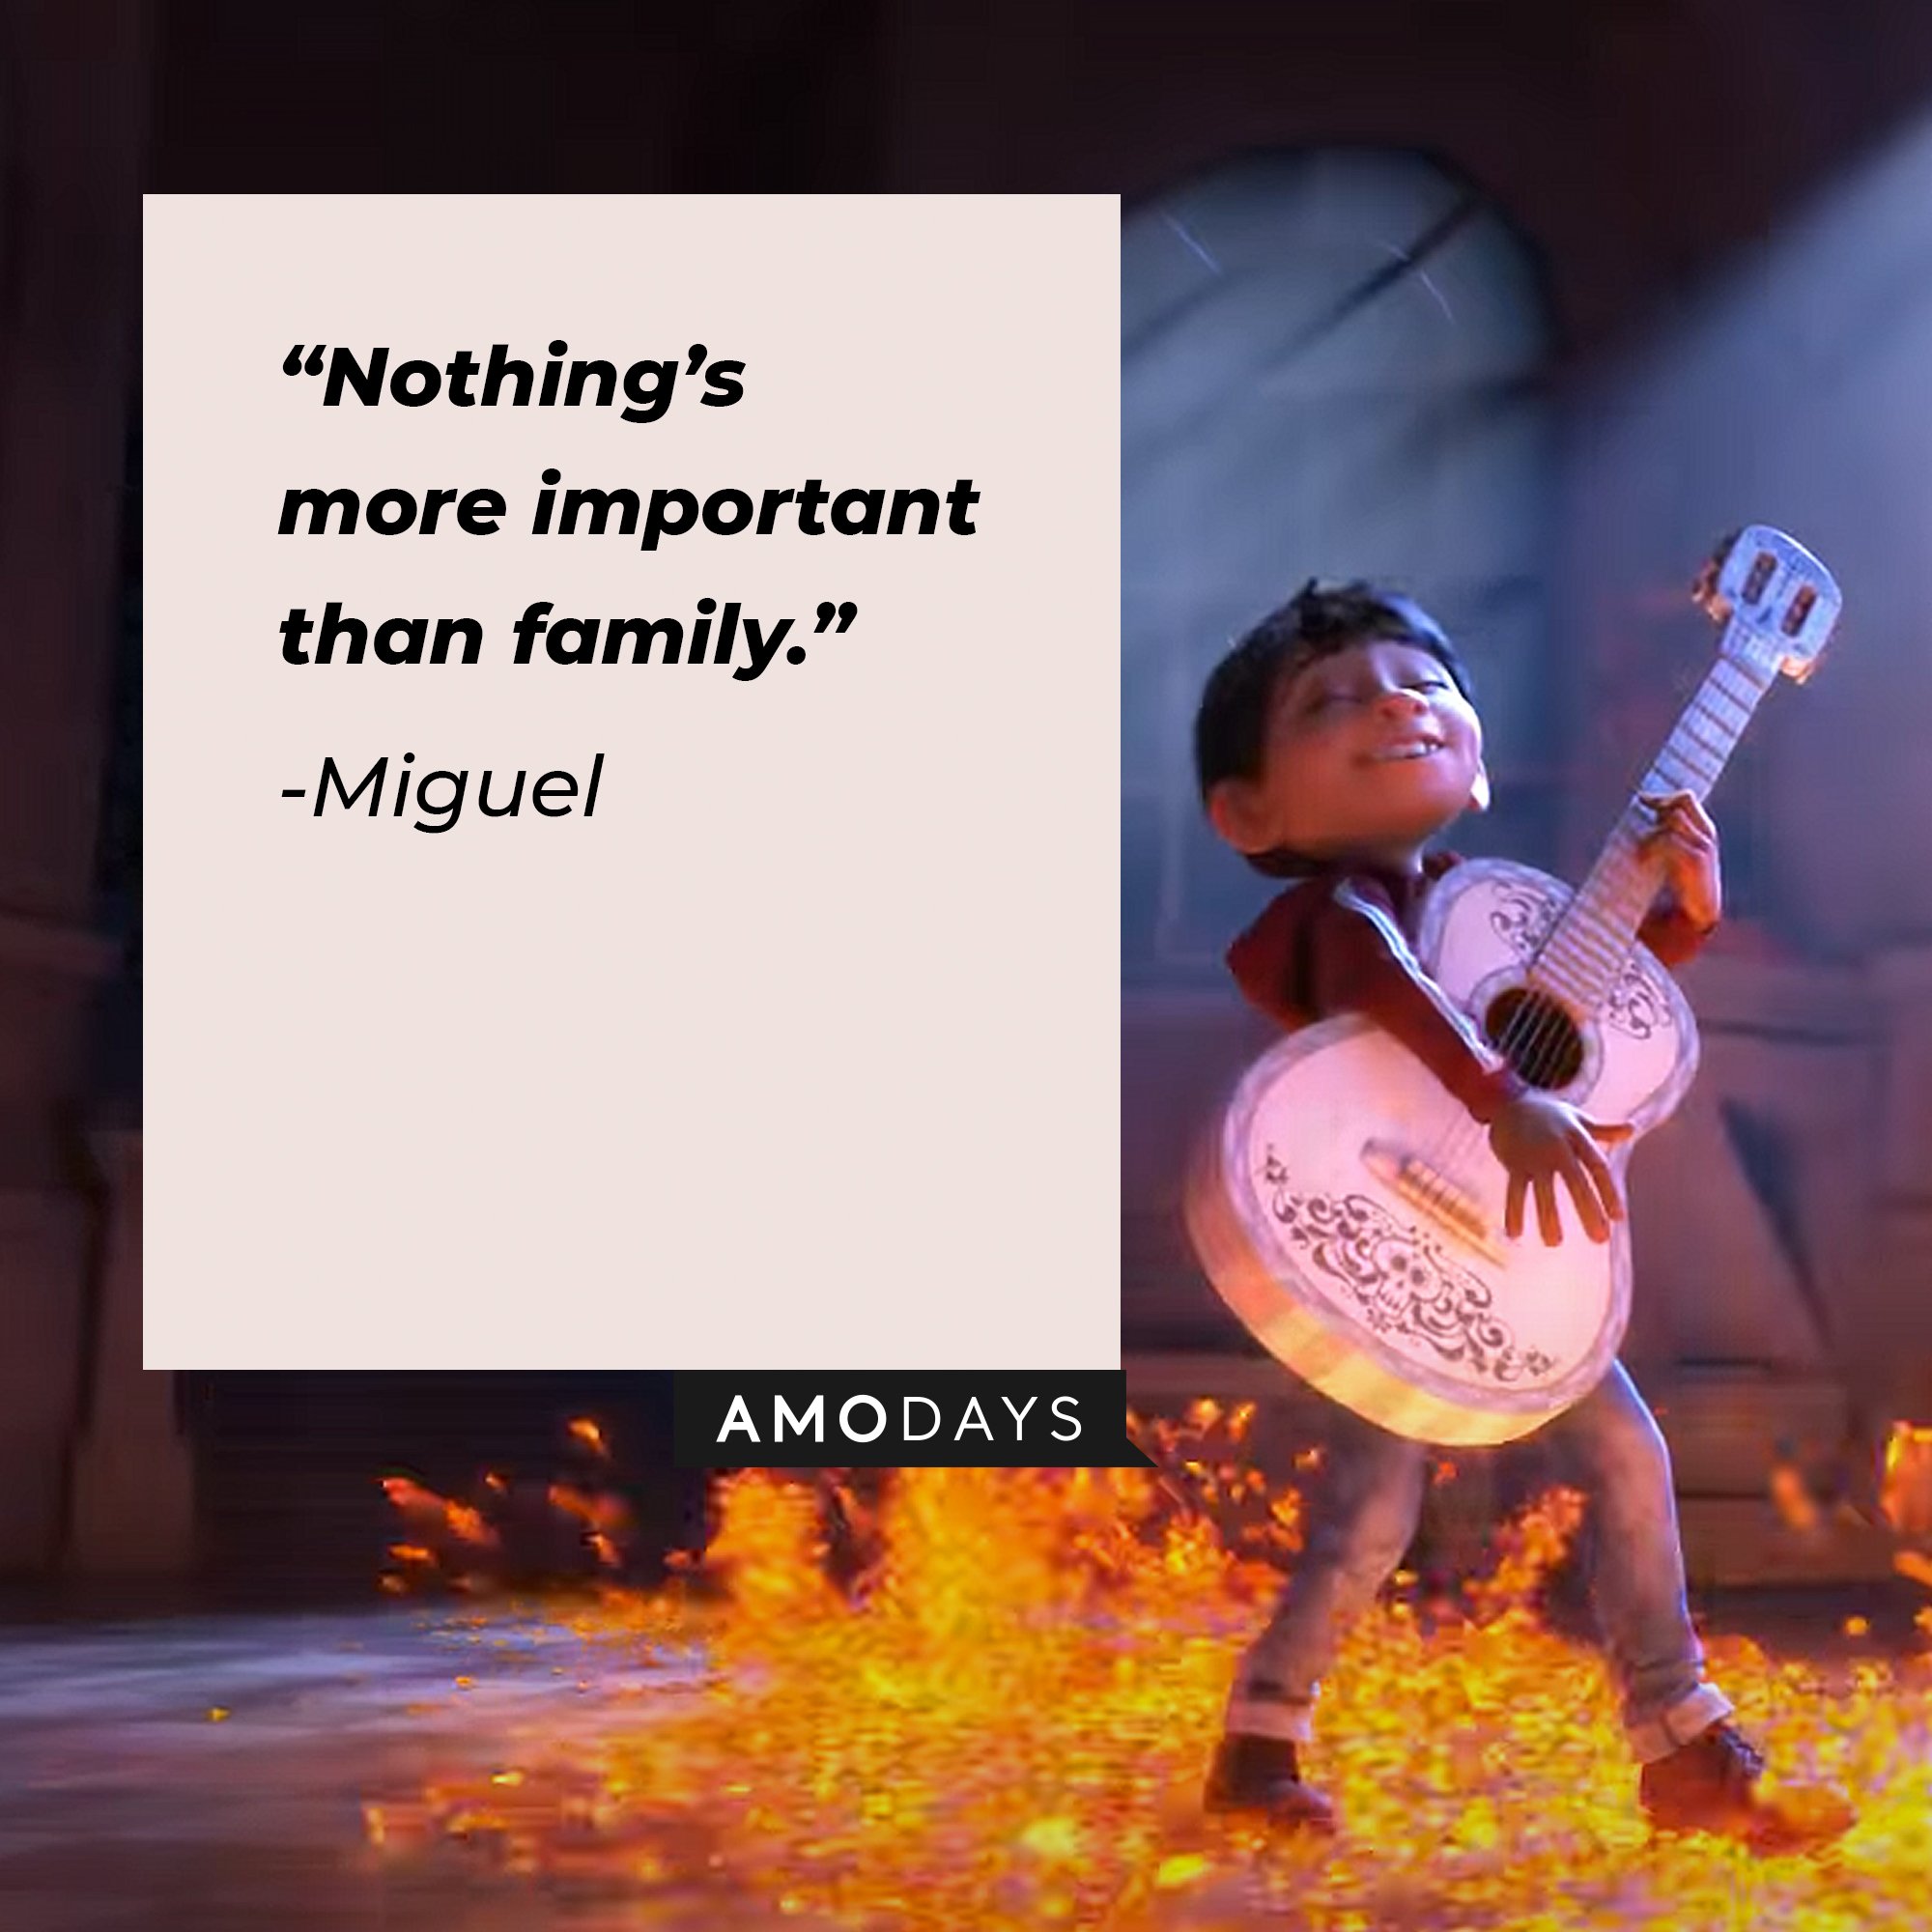 Miguel's quote: “Nothing’s more important than family.” | Image: AmoDays